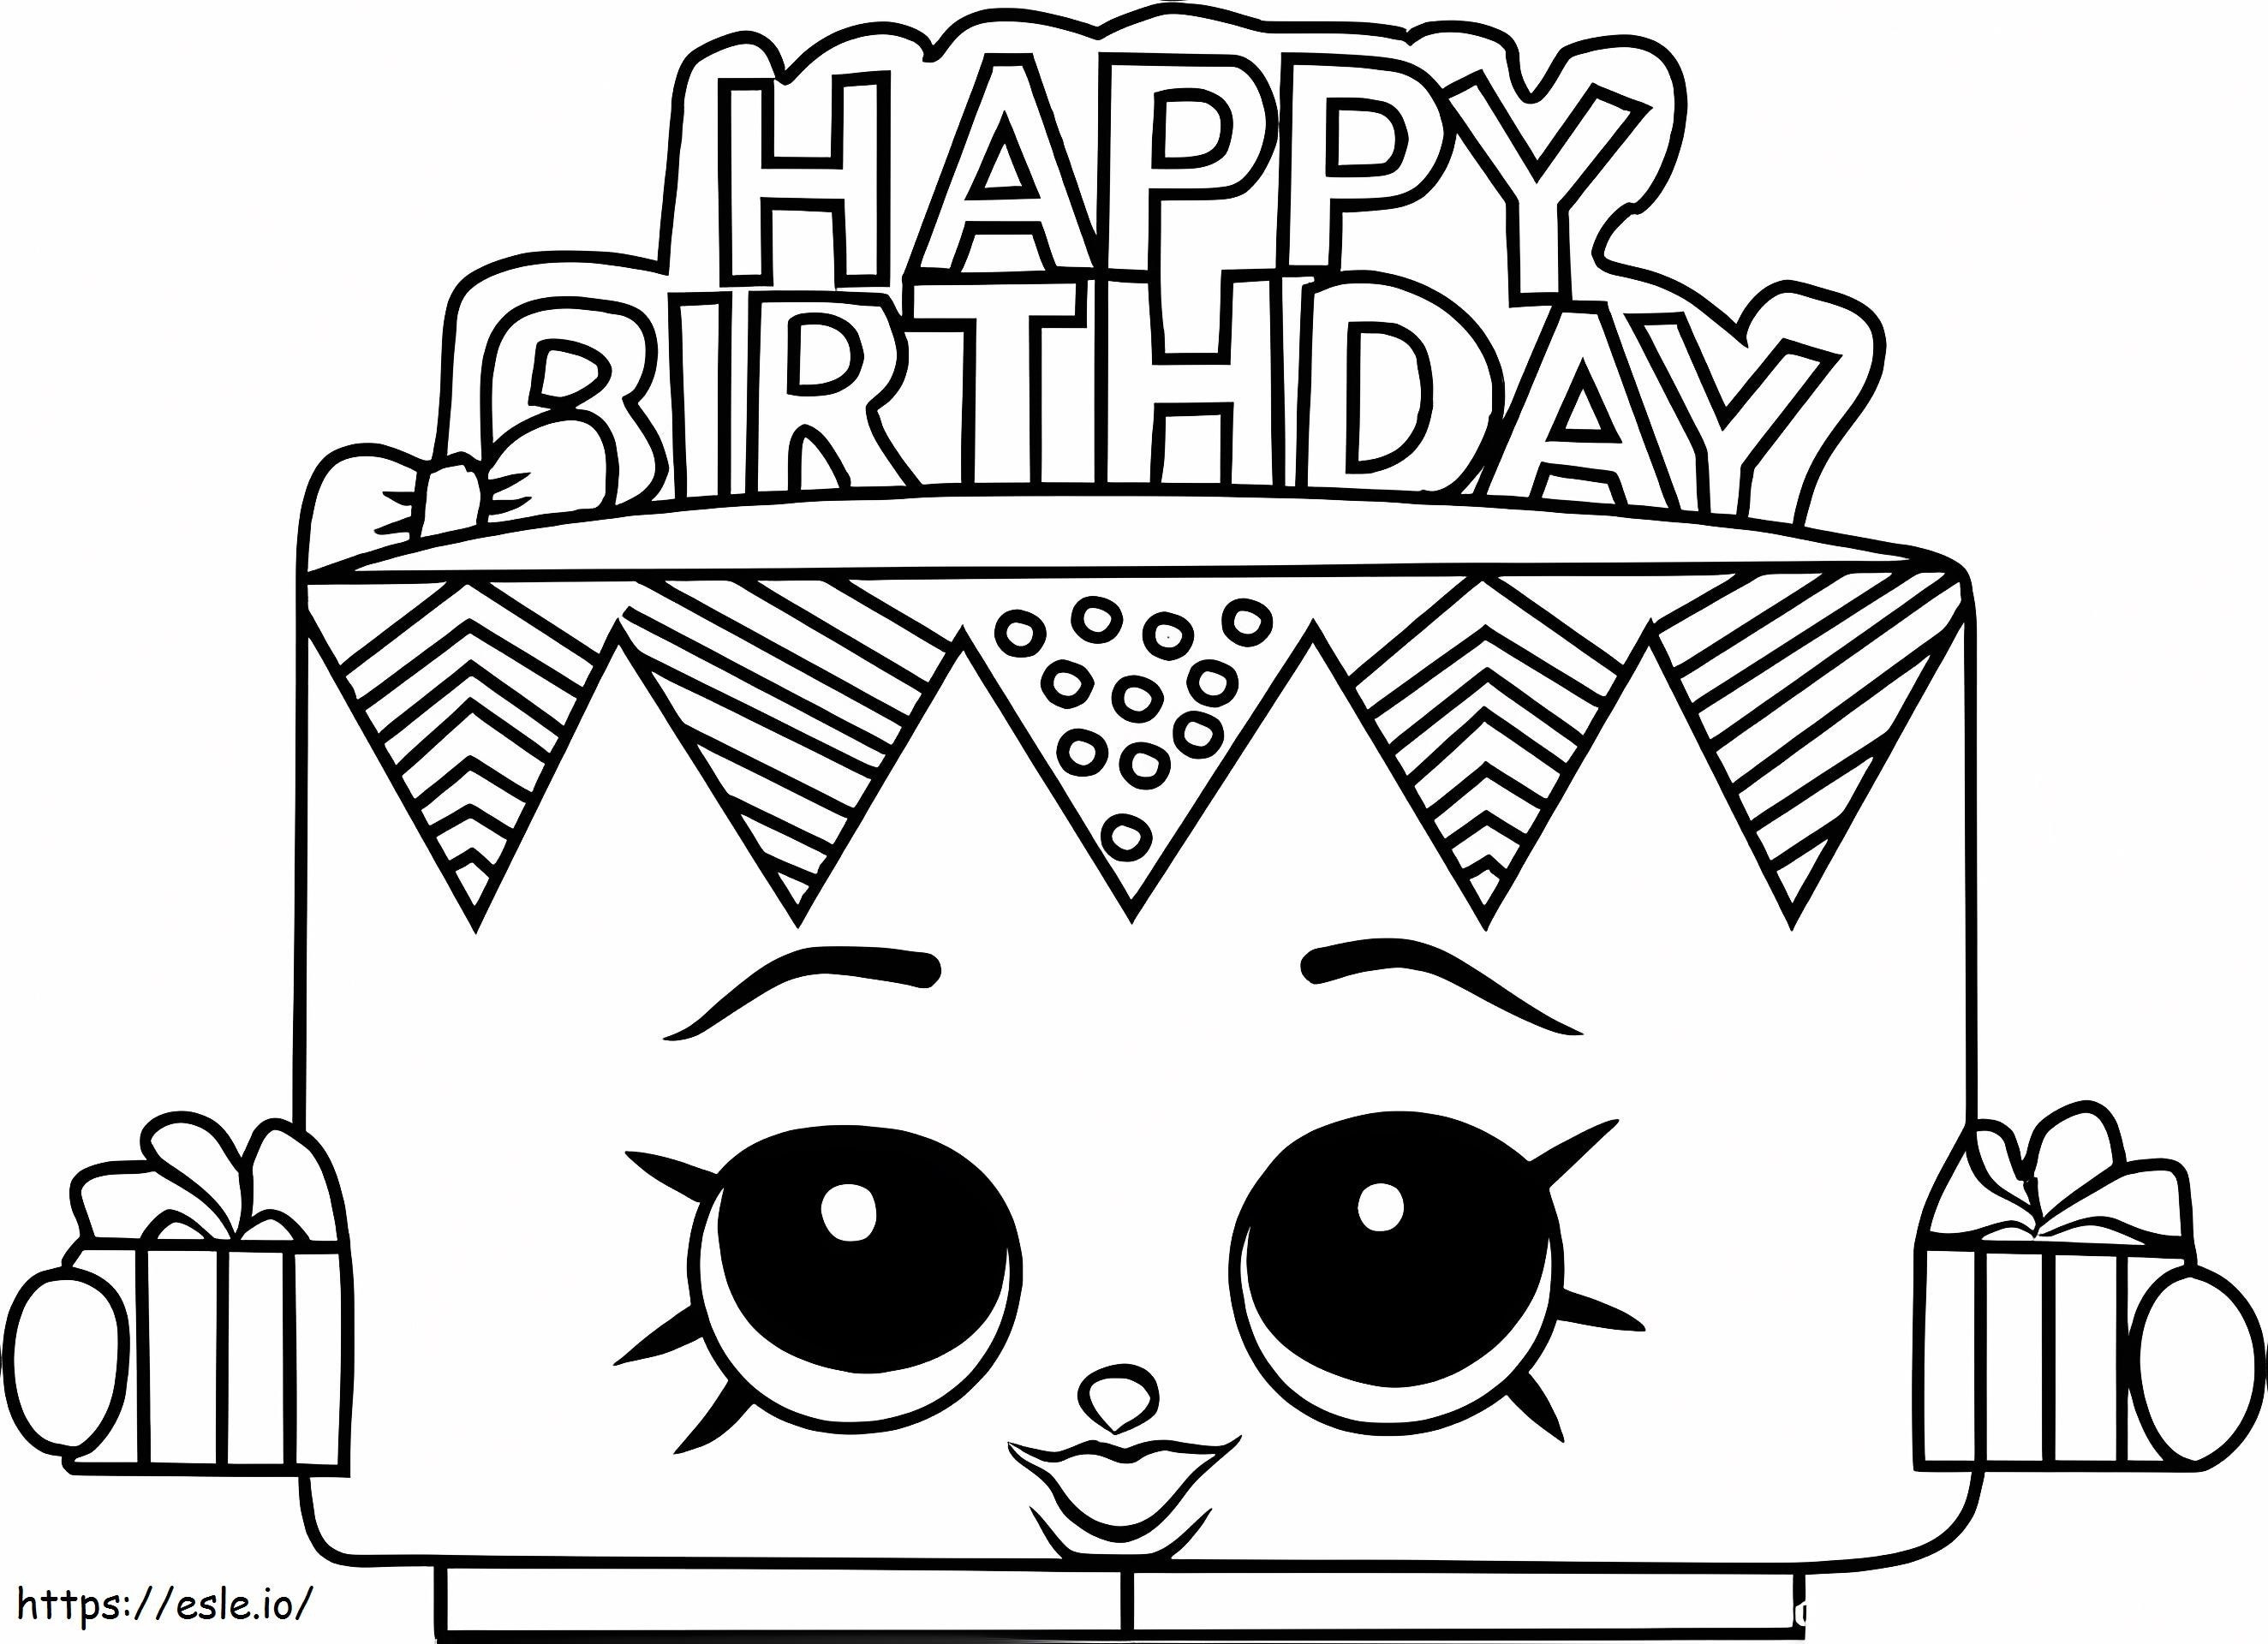 Birthday Betty Shopkins coloring page